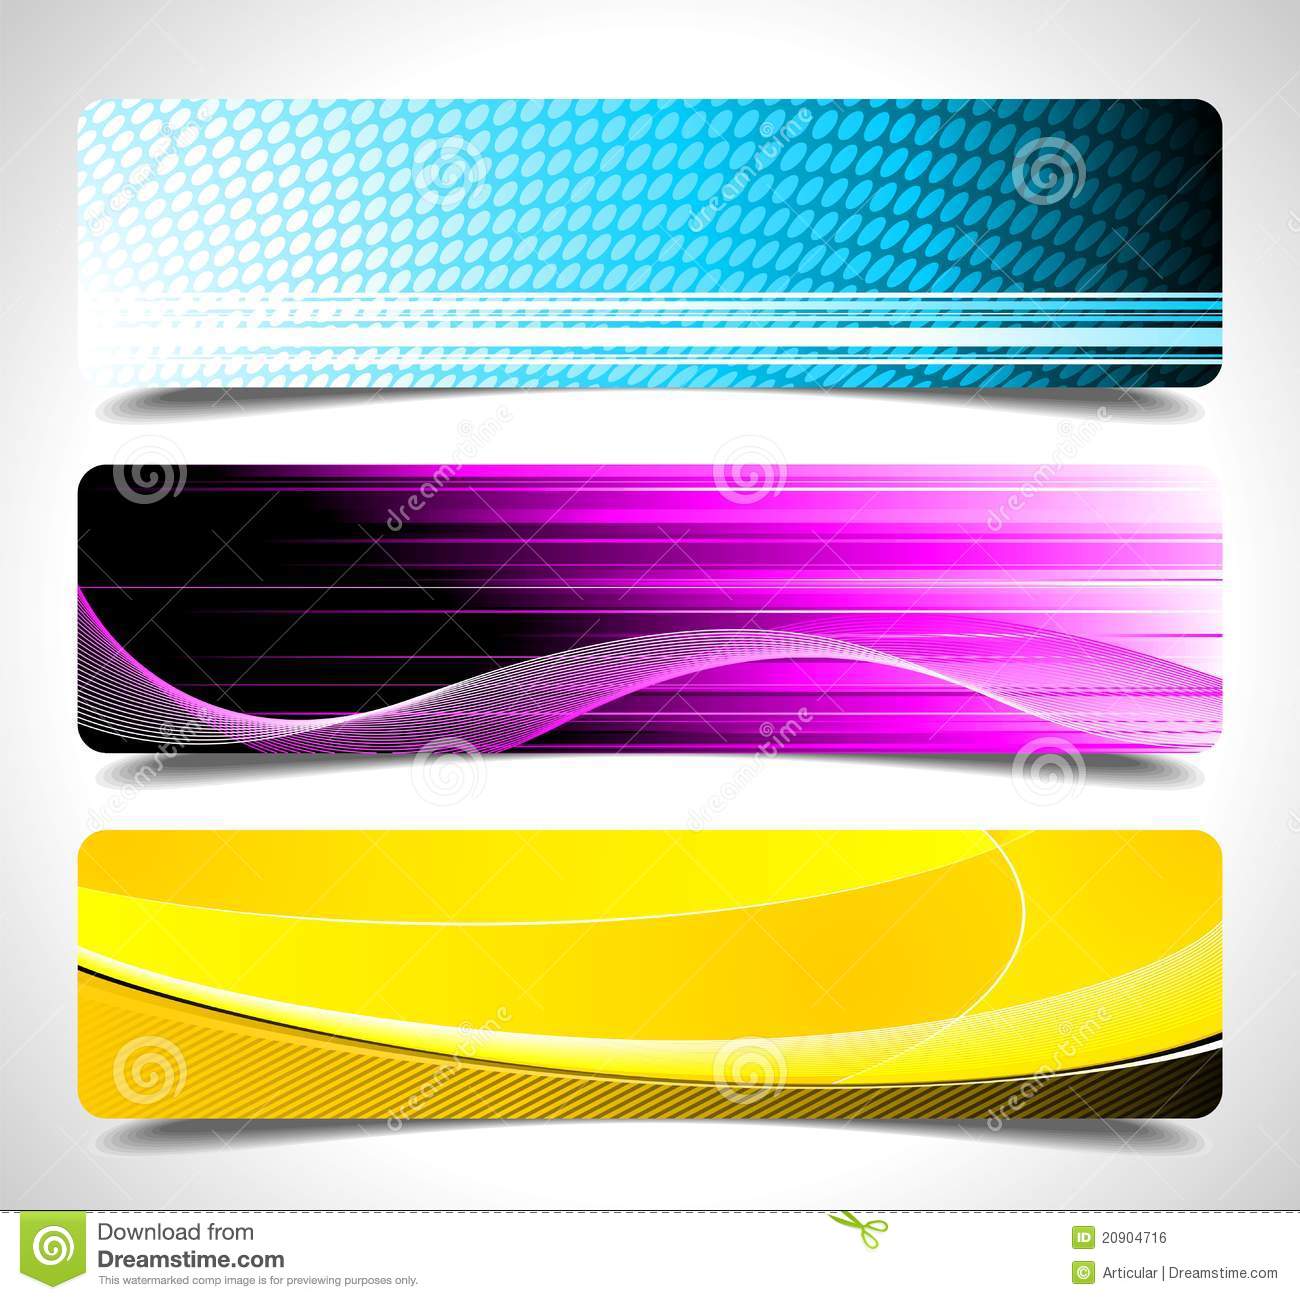 Free Vector Abstract Banners